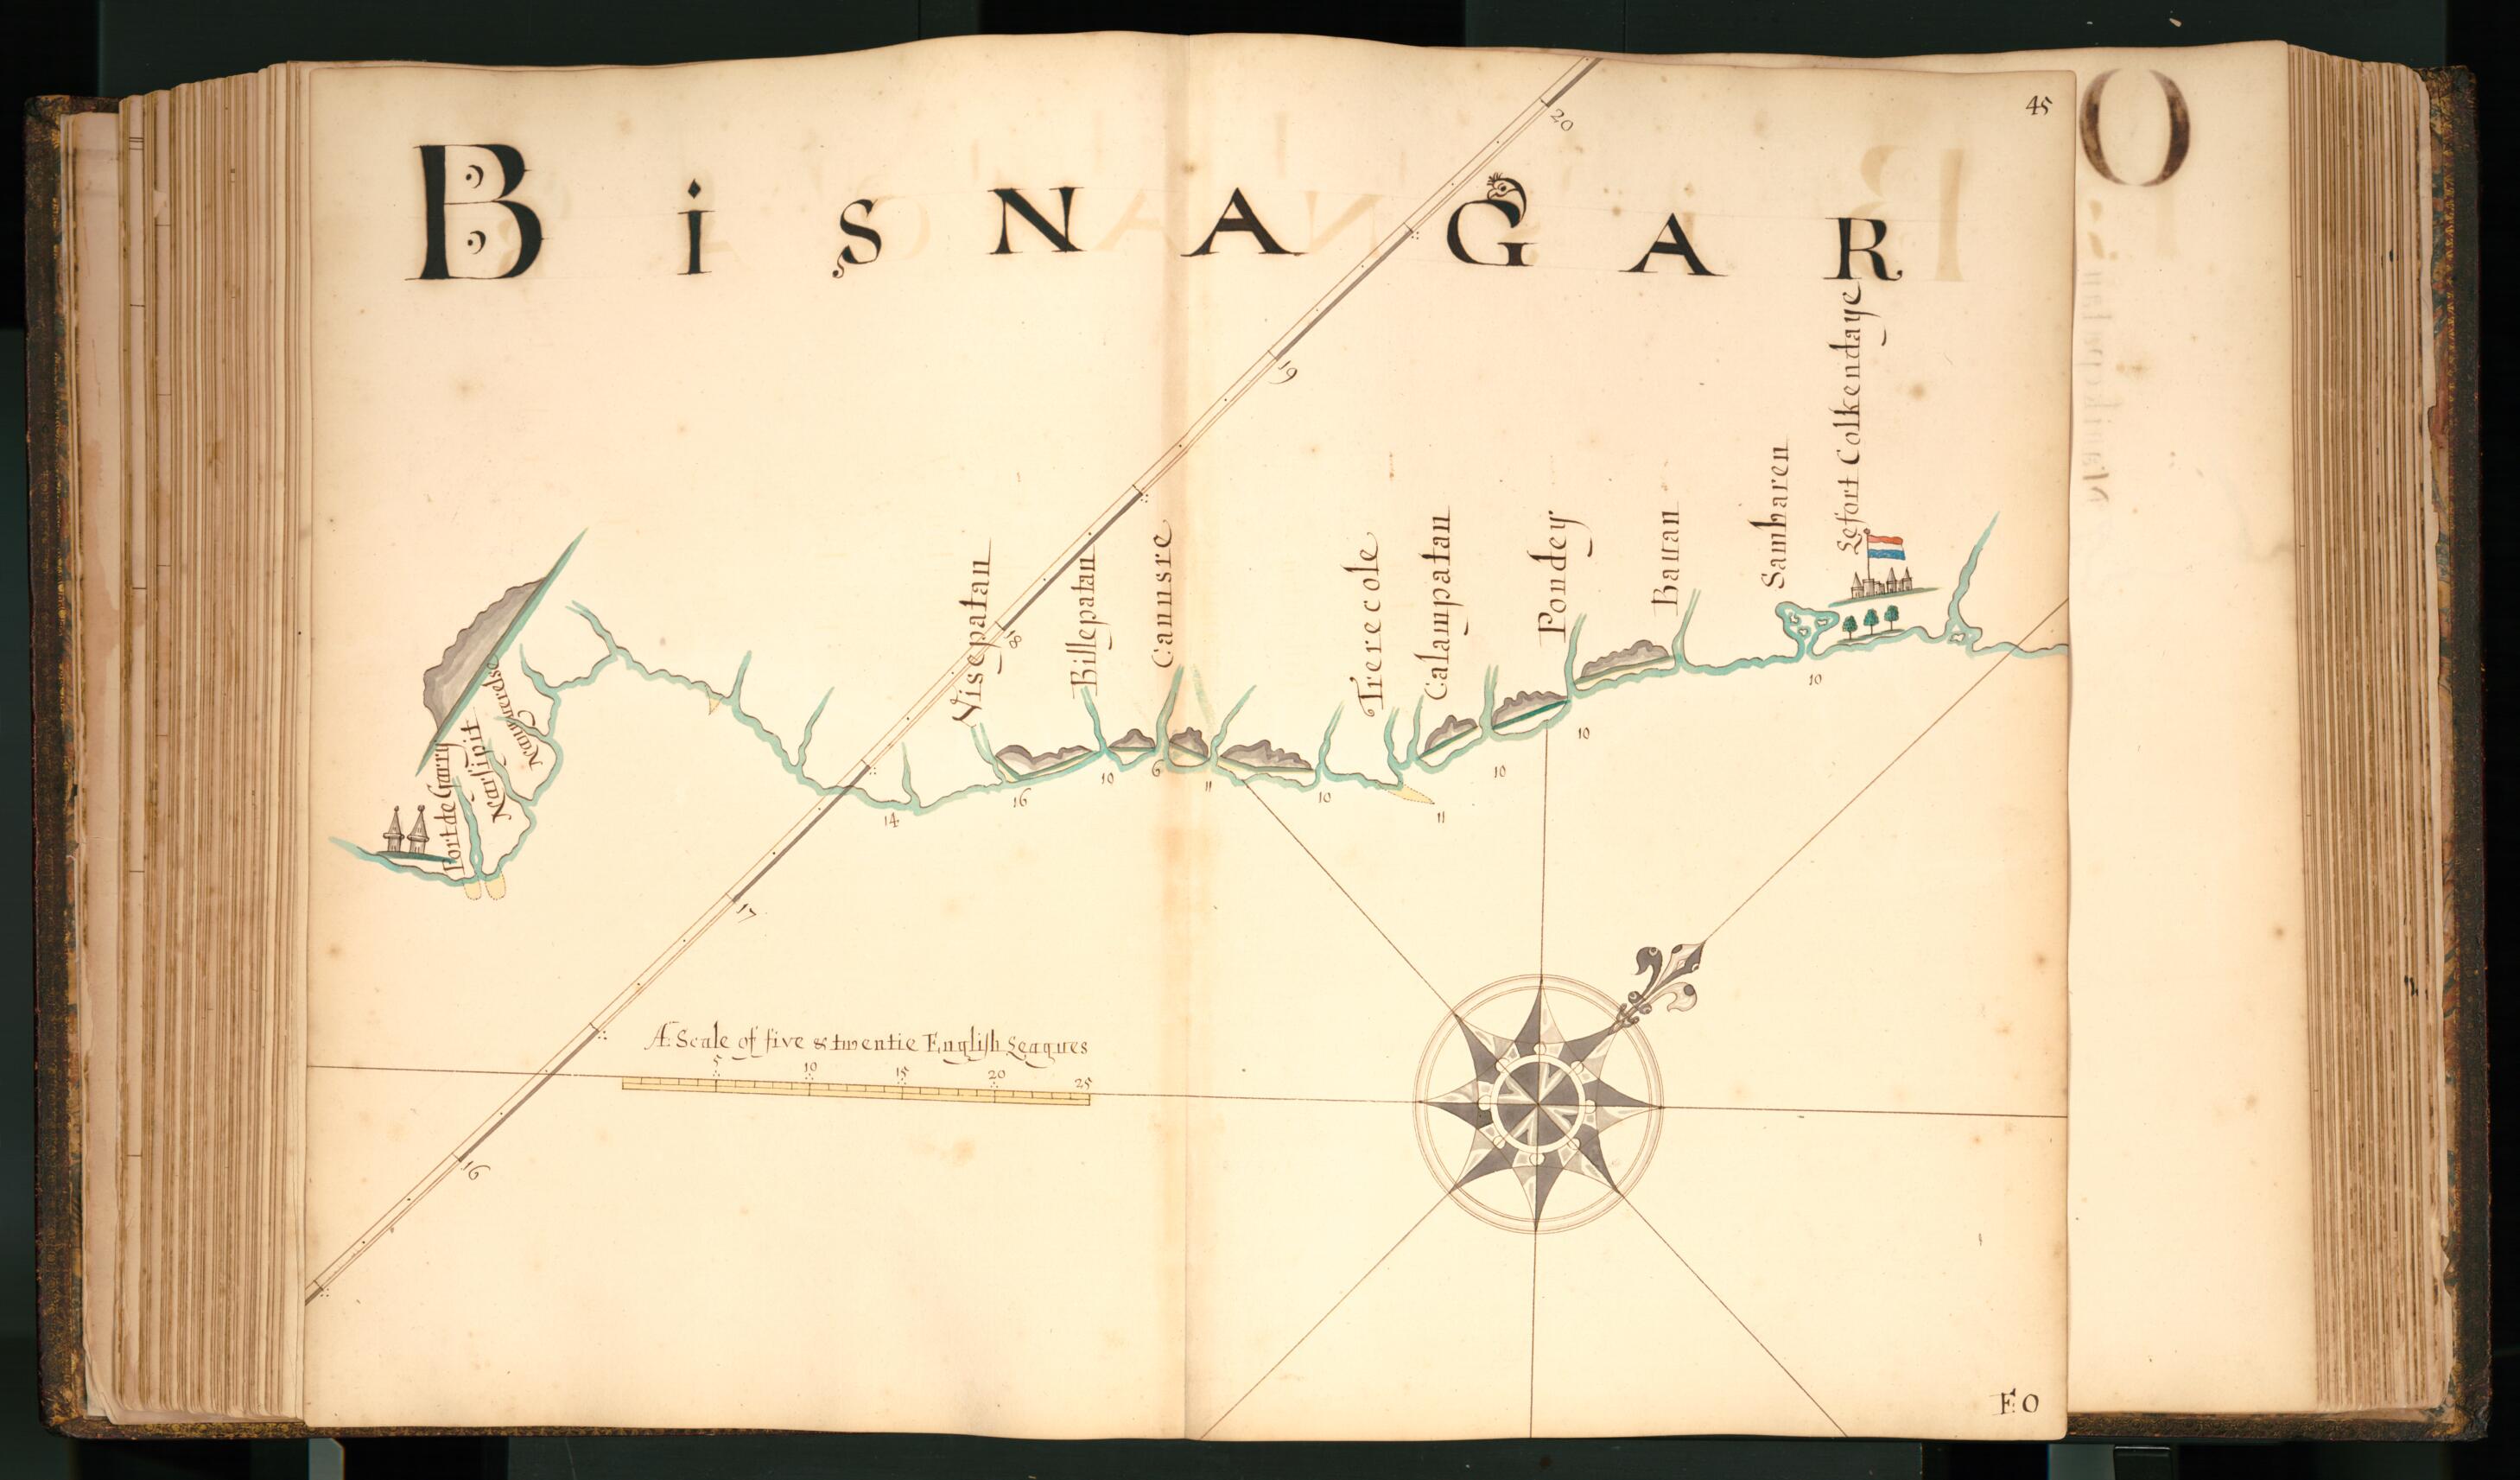 This old map of 45) Bisnagar from Buccaneer Atlas from 1690 was created by William Hacke in 1690